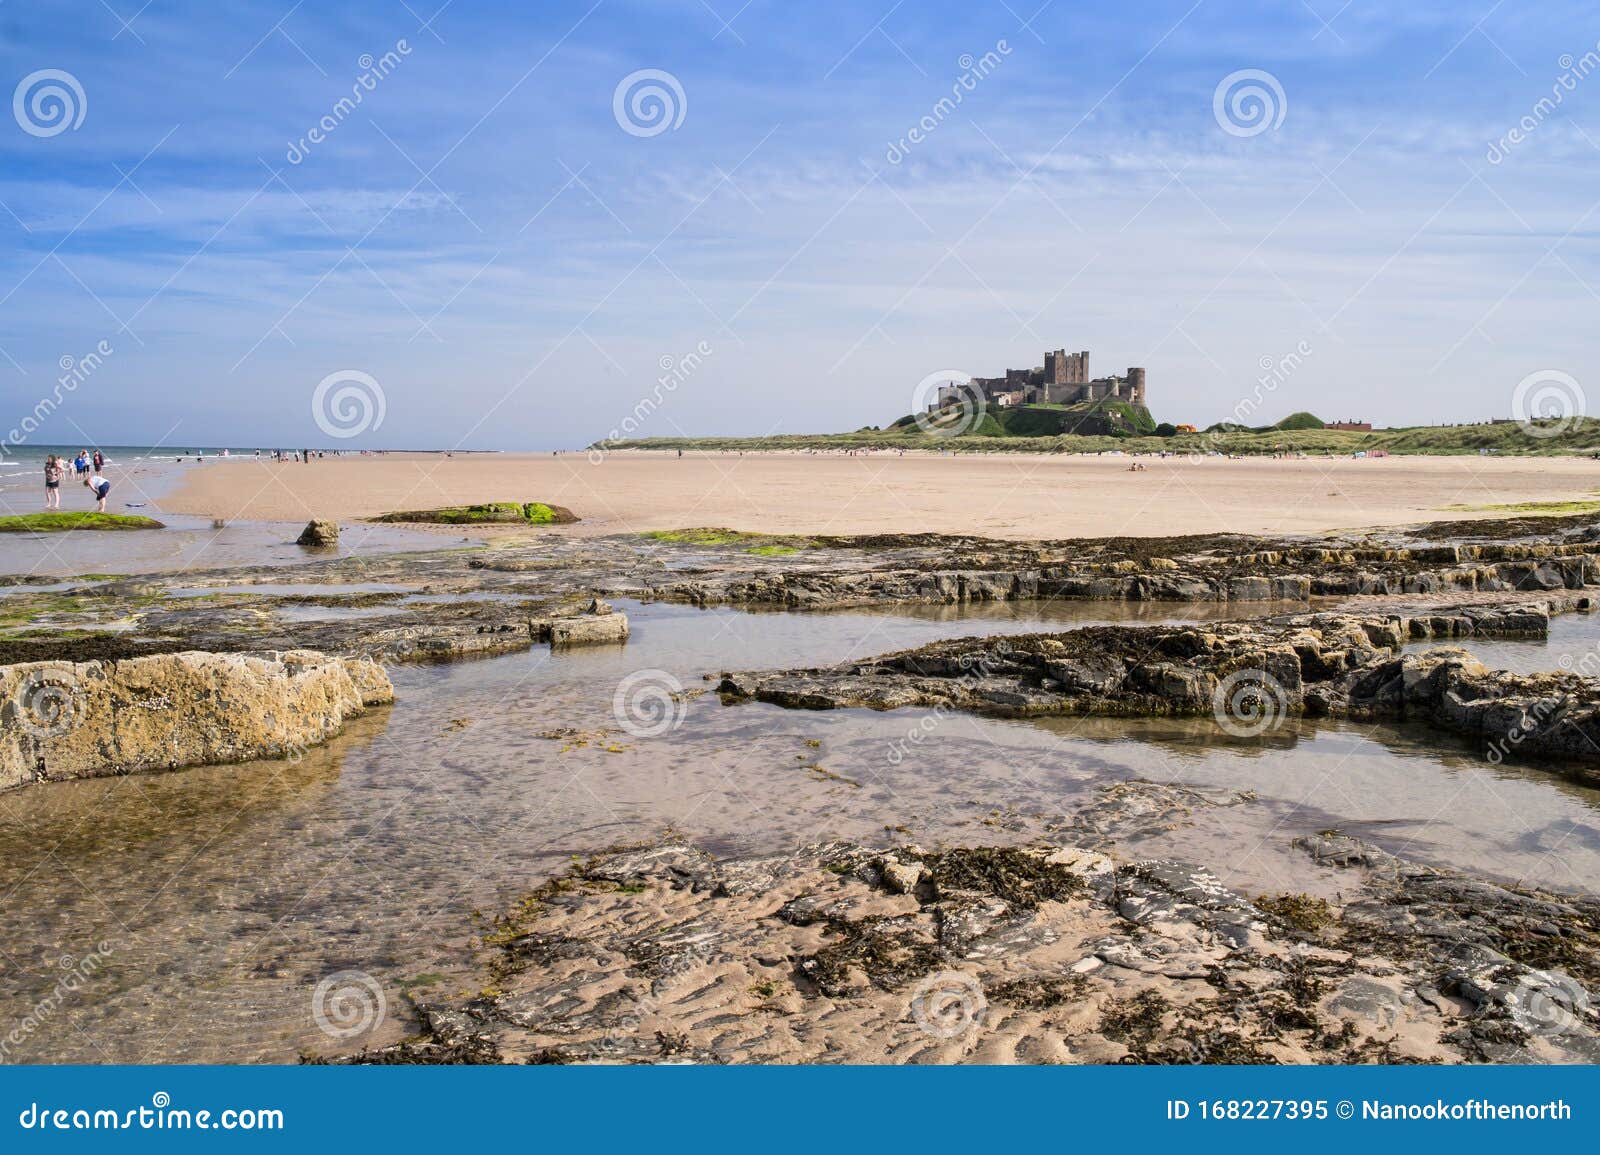 the rocky foreshore and sandy beach with bamburgh castle in the background